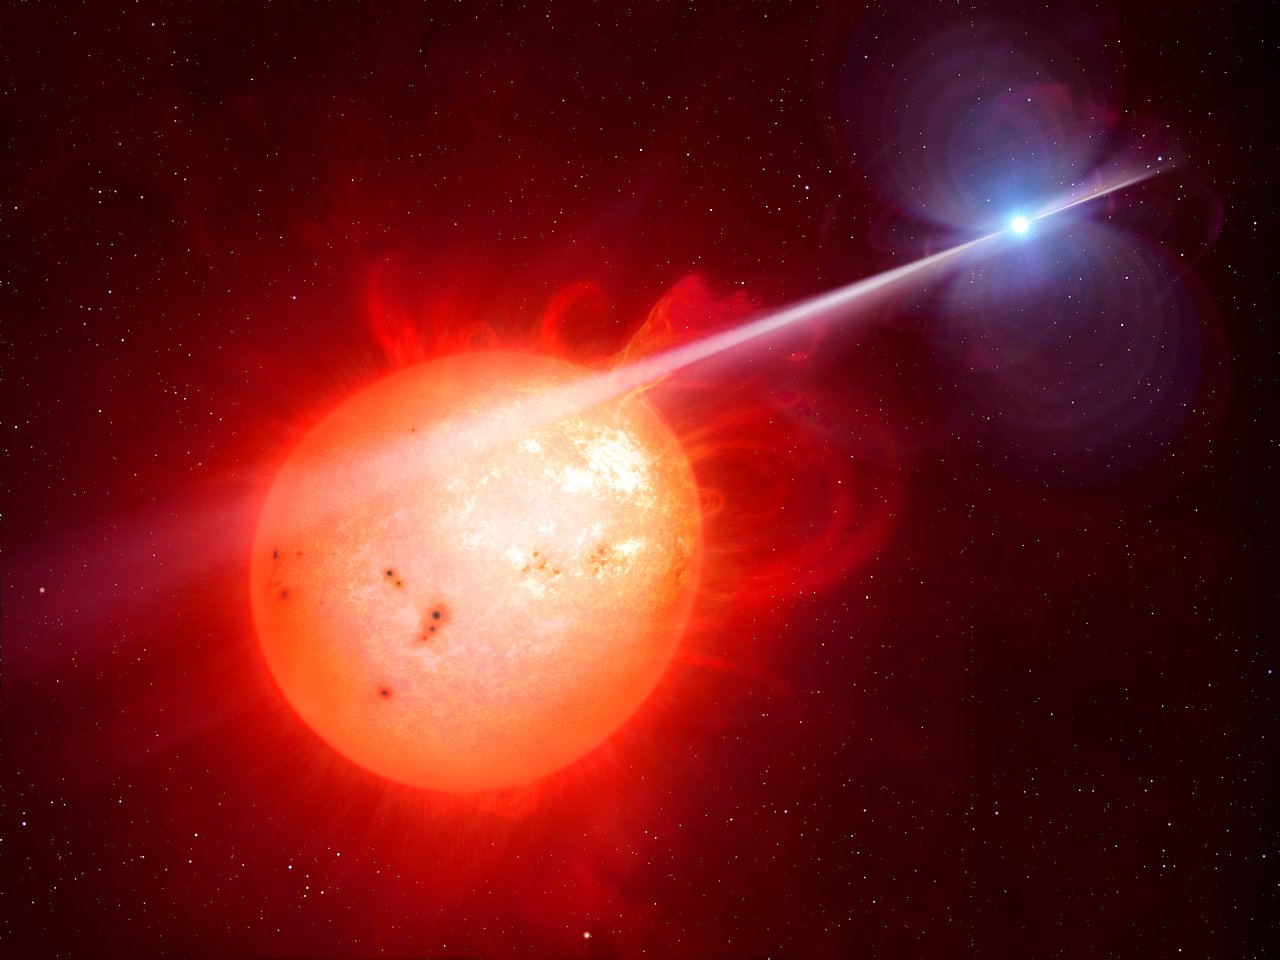 This artist’s impression shows the strange object AR Scorpii. In this unique double star a rapidly spinning white dwarf star (right) powers electrons up to almost the speed of light. These high energy particles release blasts of radiation that lash the companion red dwarf star (left) and cause the entire system to pulse dramatically every 1.97 minutes with radiation ranging from the ultraviolet to radio.